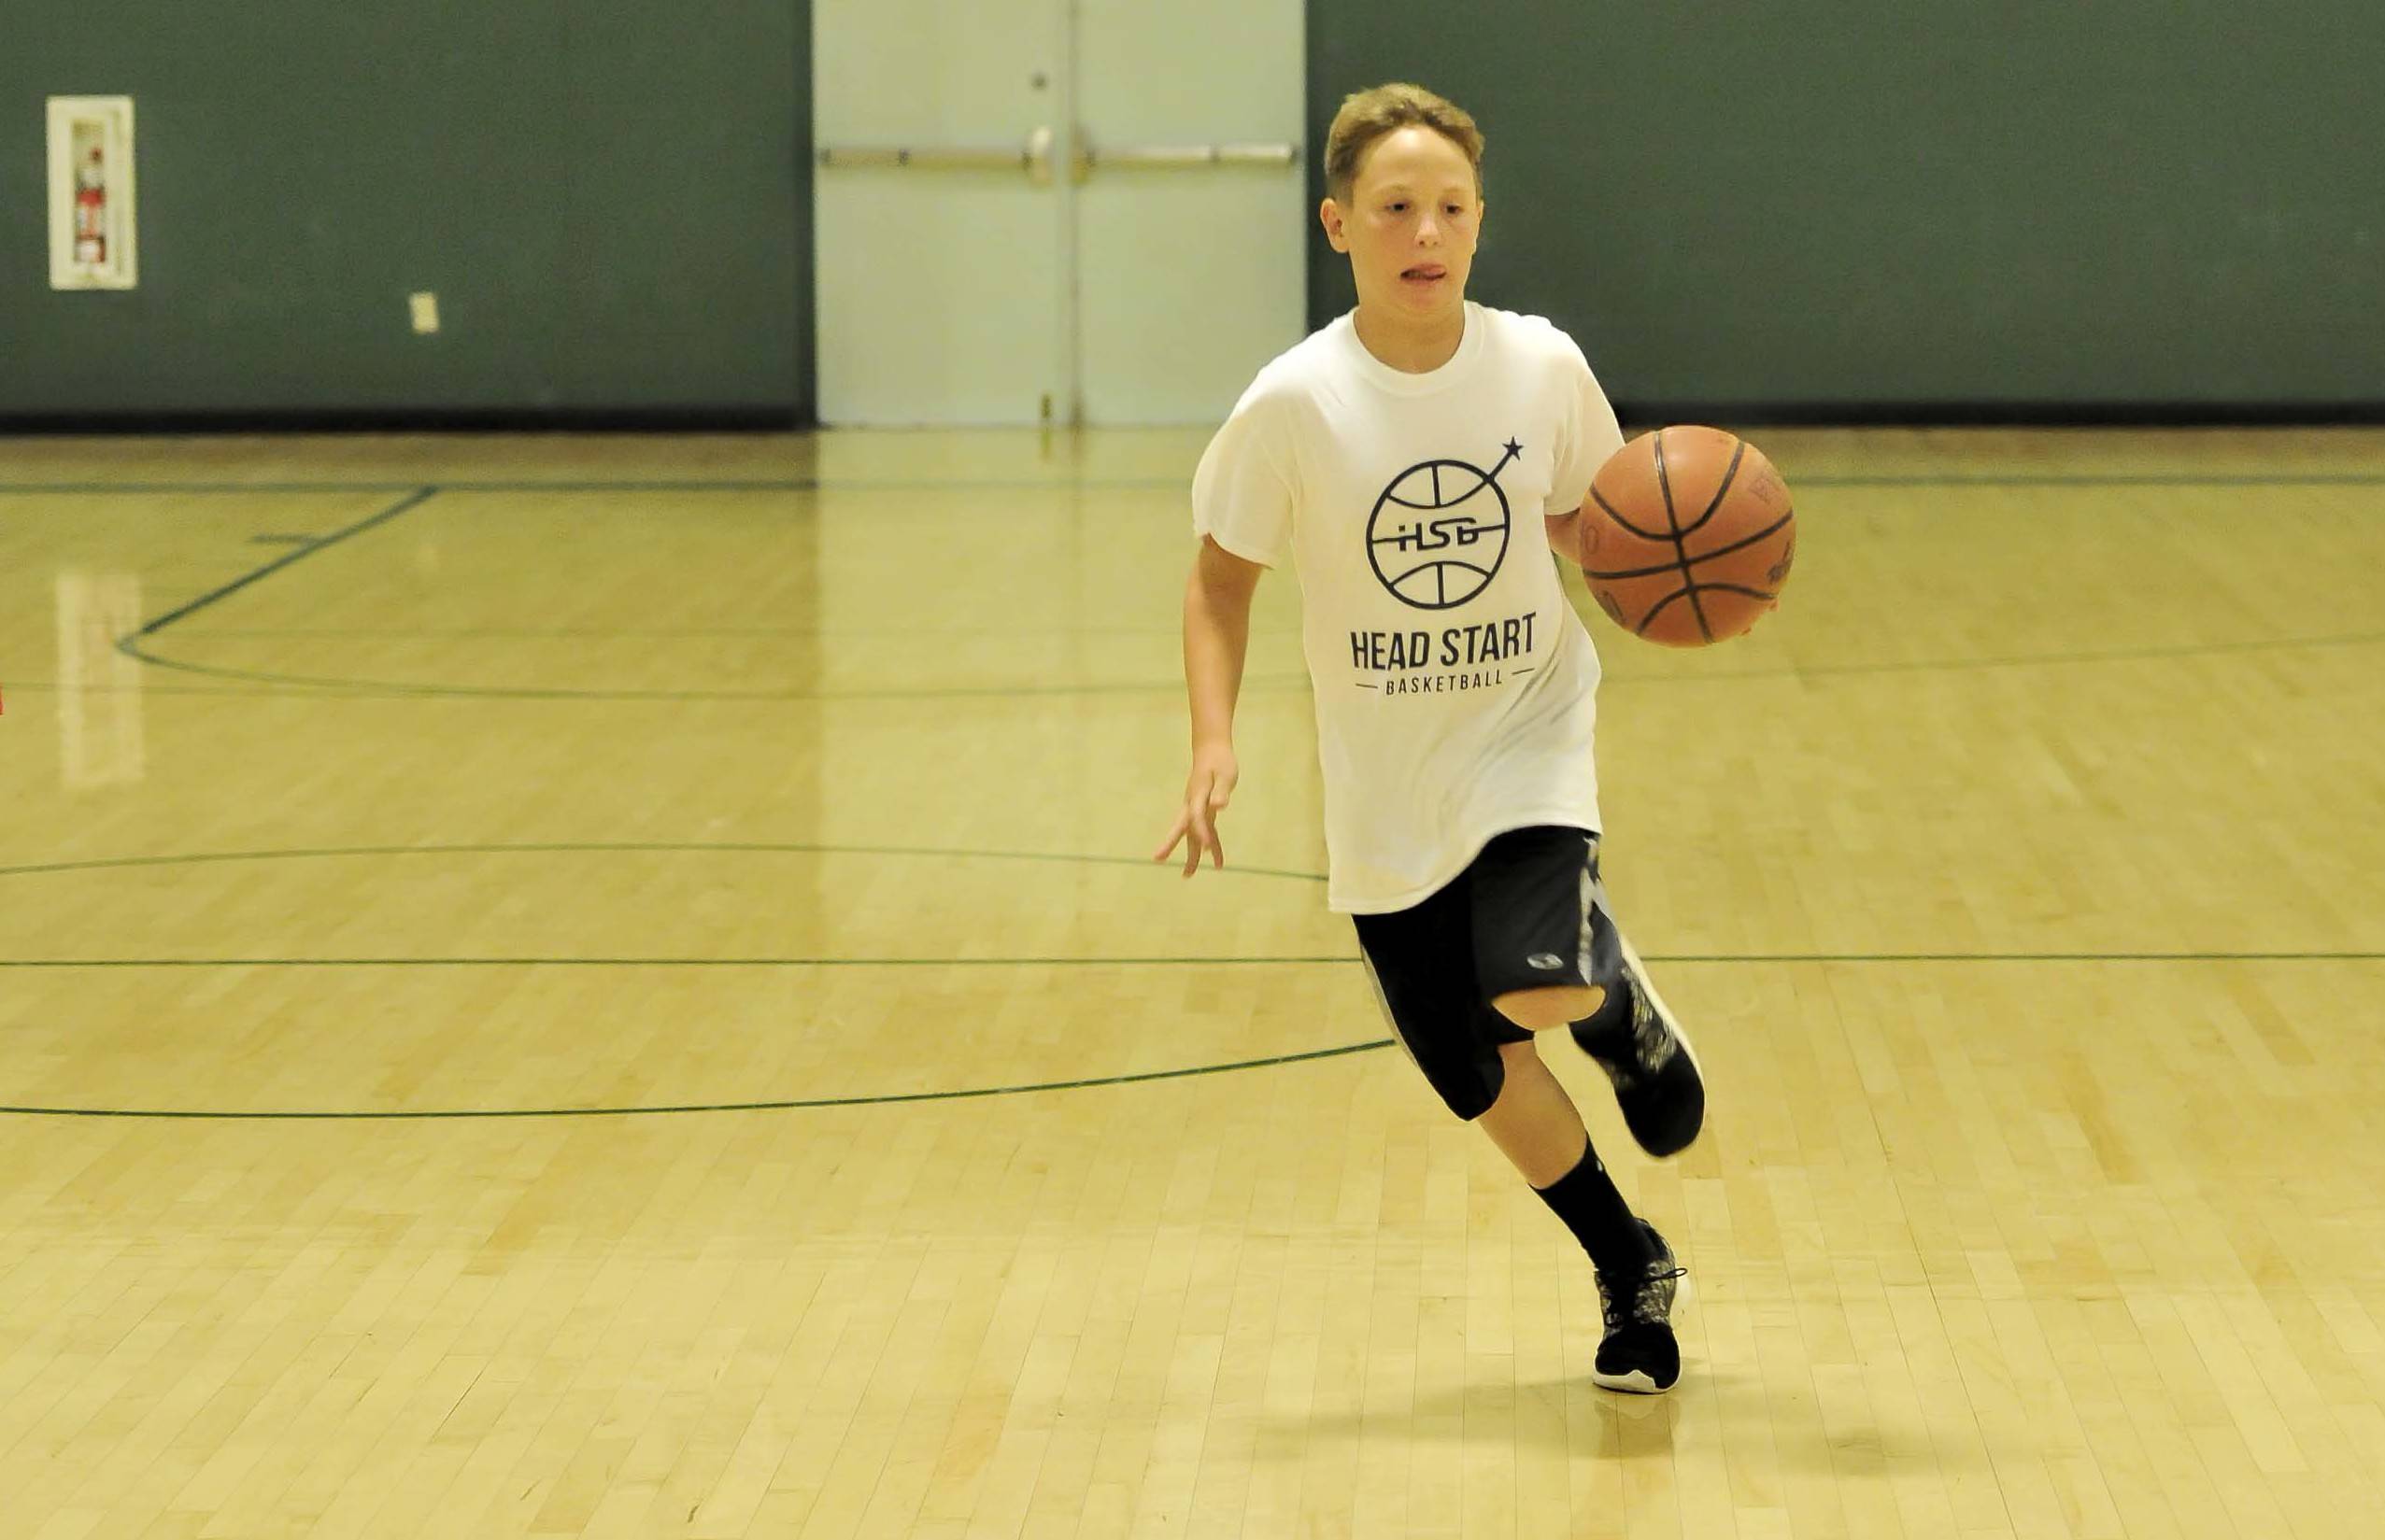 The Best Way To Improve Your Basketball Game This Summer